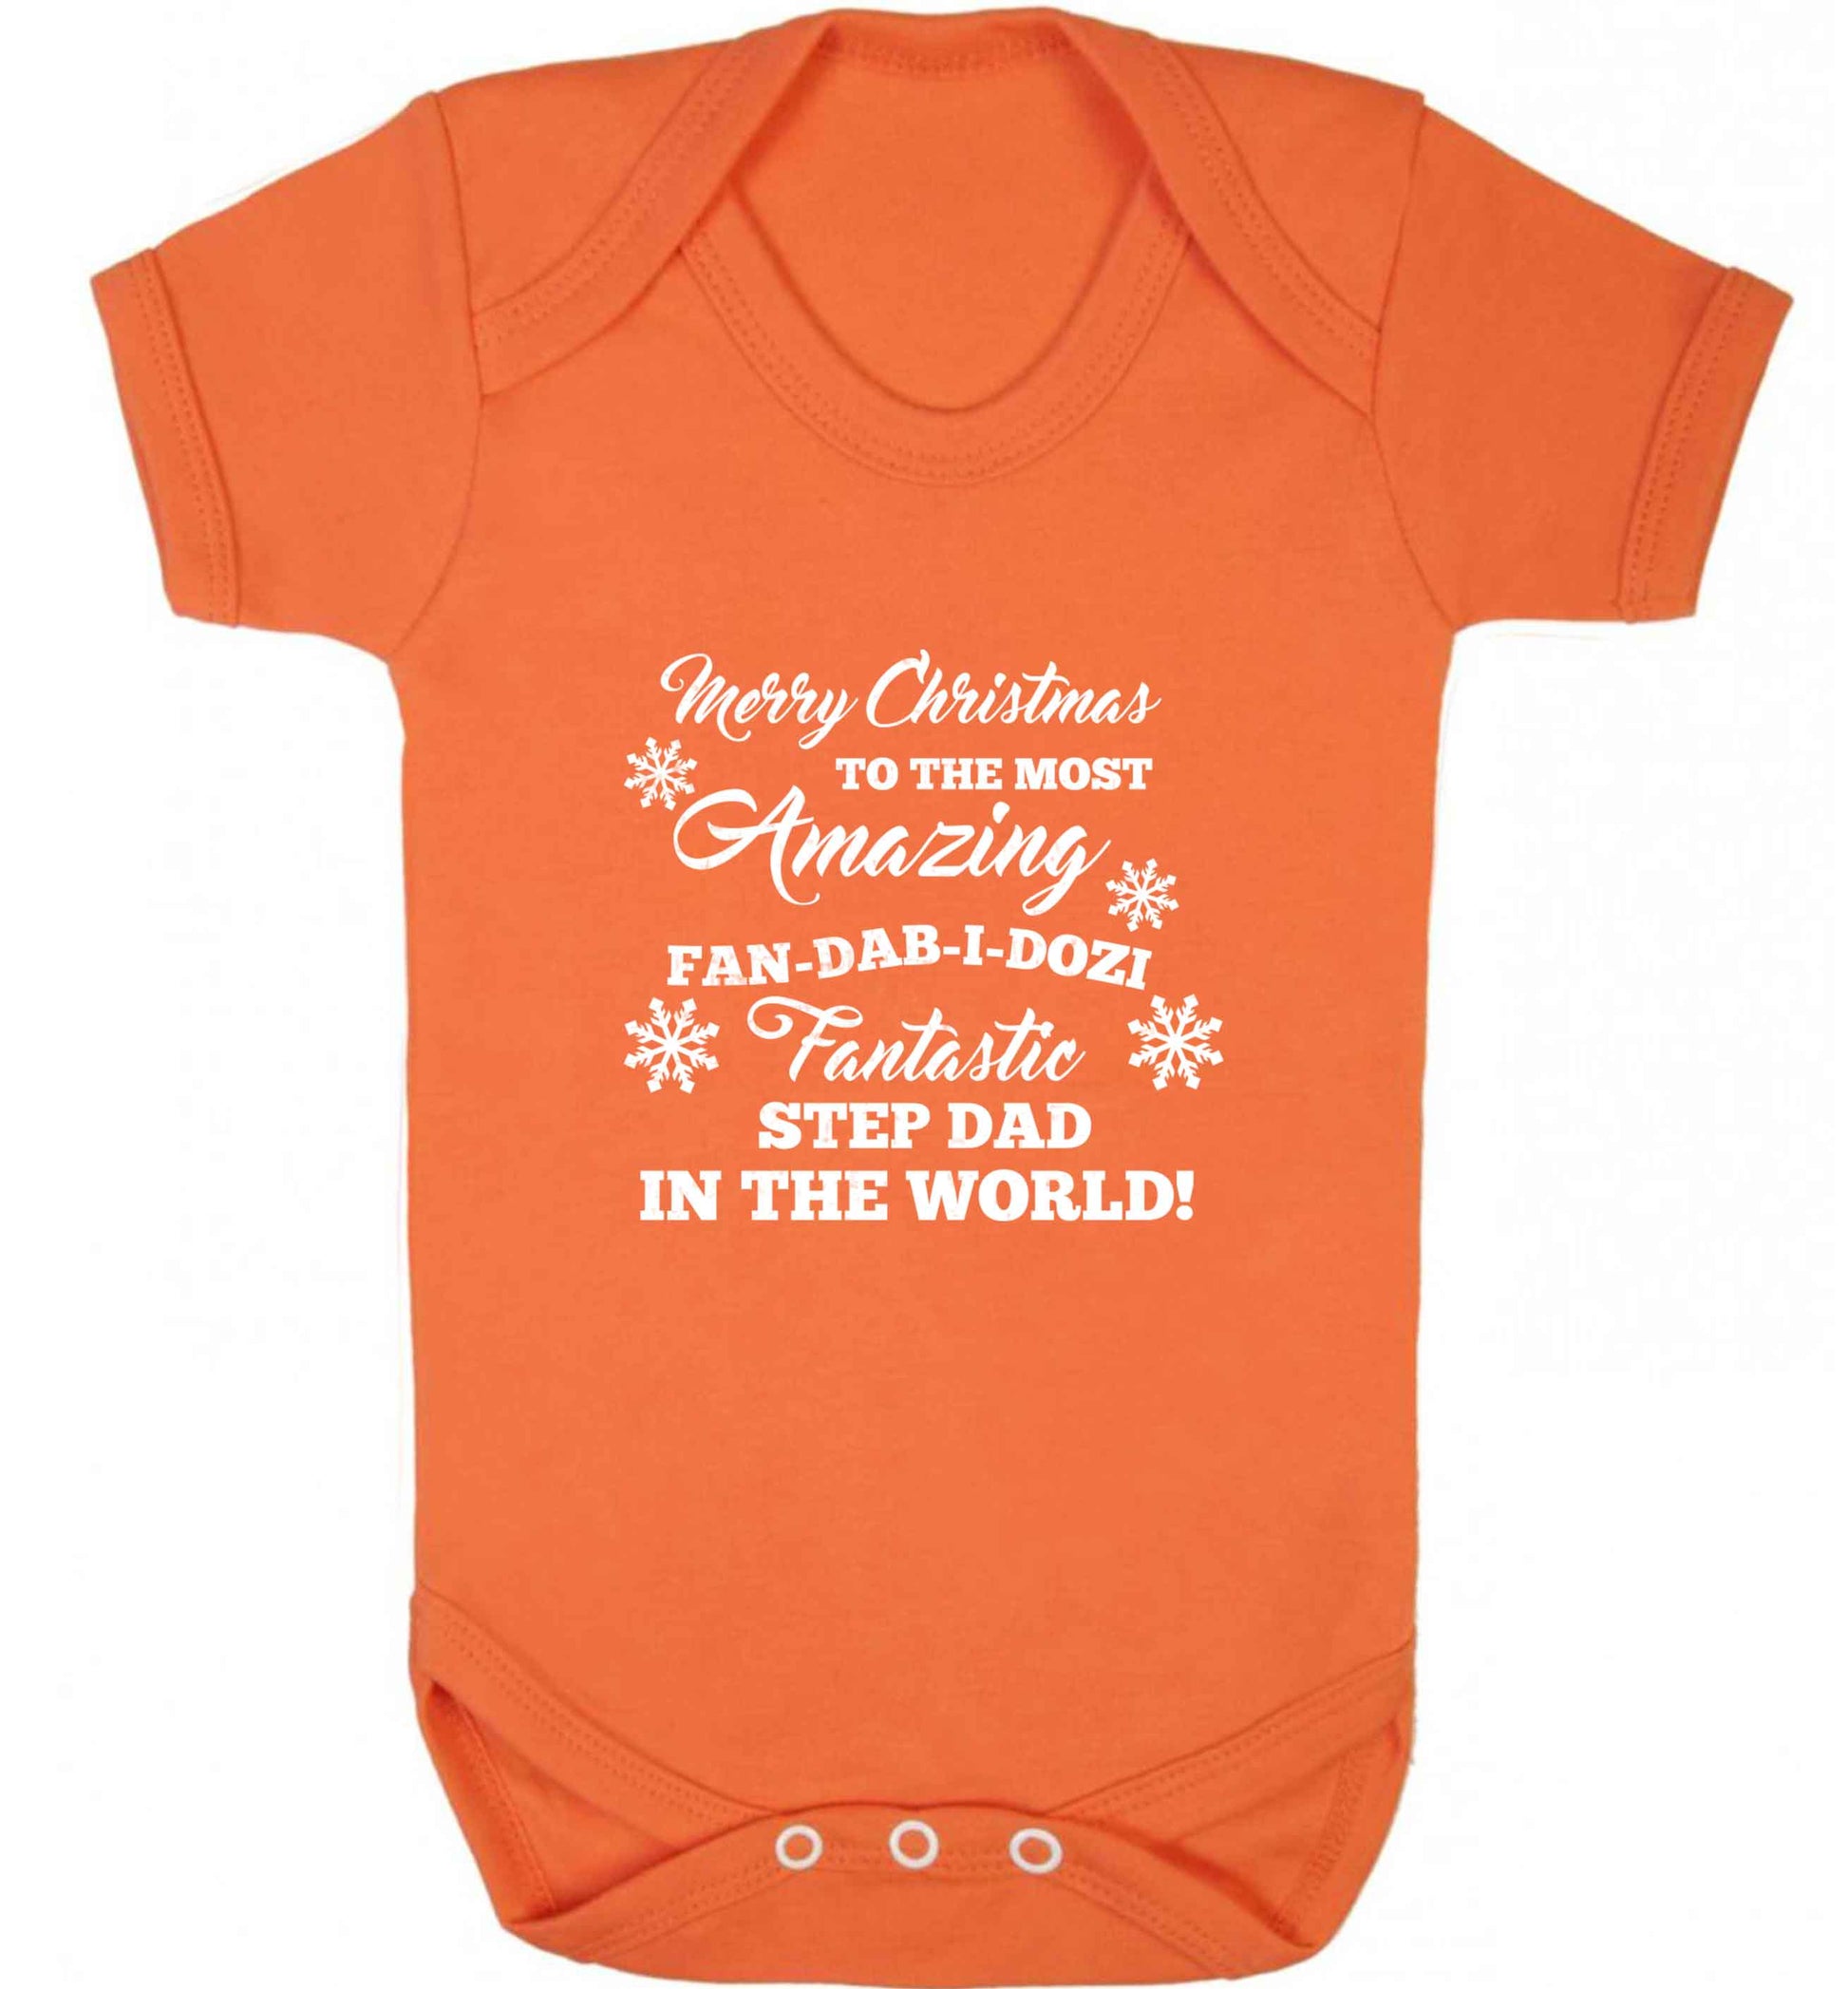 Merry Christmas to the most amazing fan-dab-i-dozi fantasic Step Dad in the world baby vest orange 18-24 months